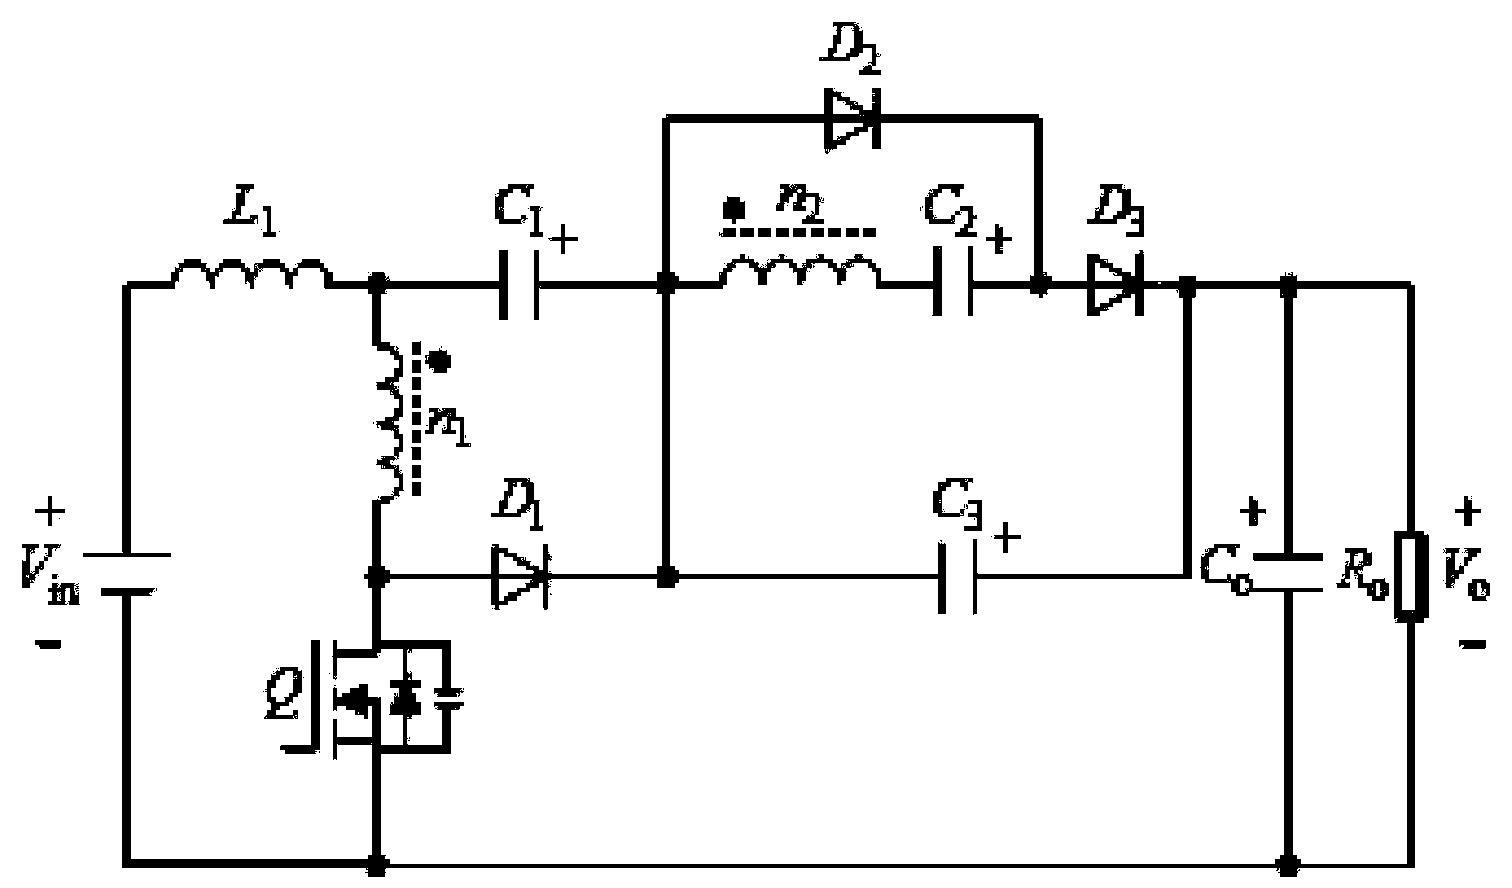 Low-input-current-ripple single-switch high-gain converter